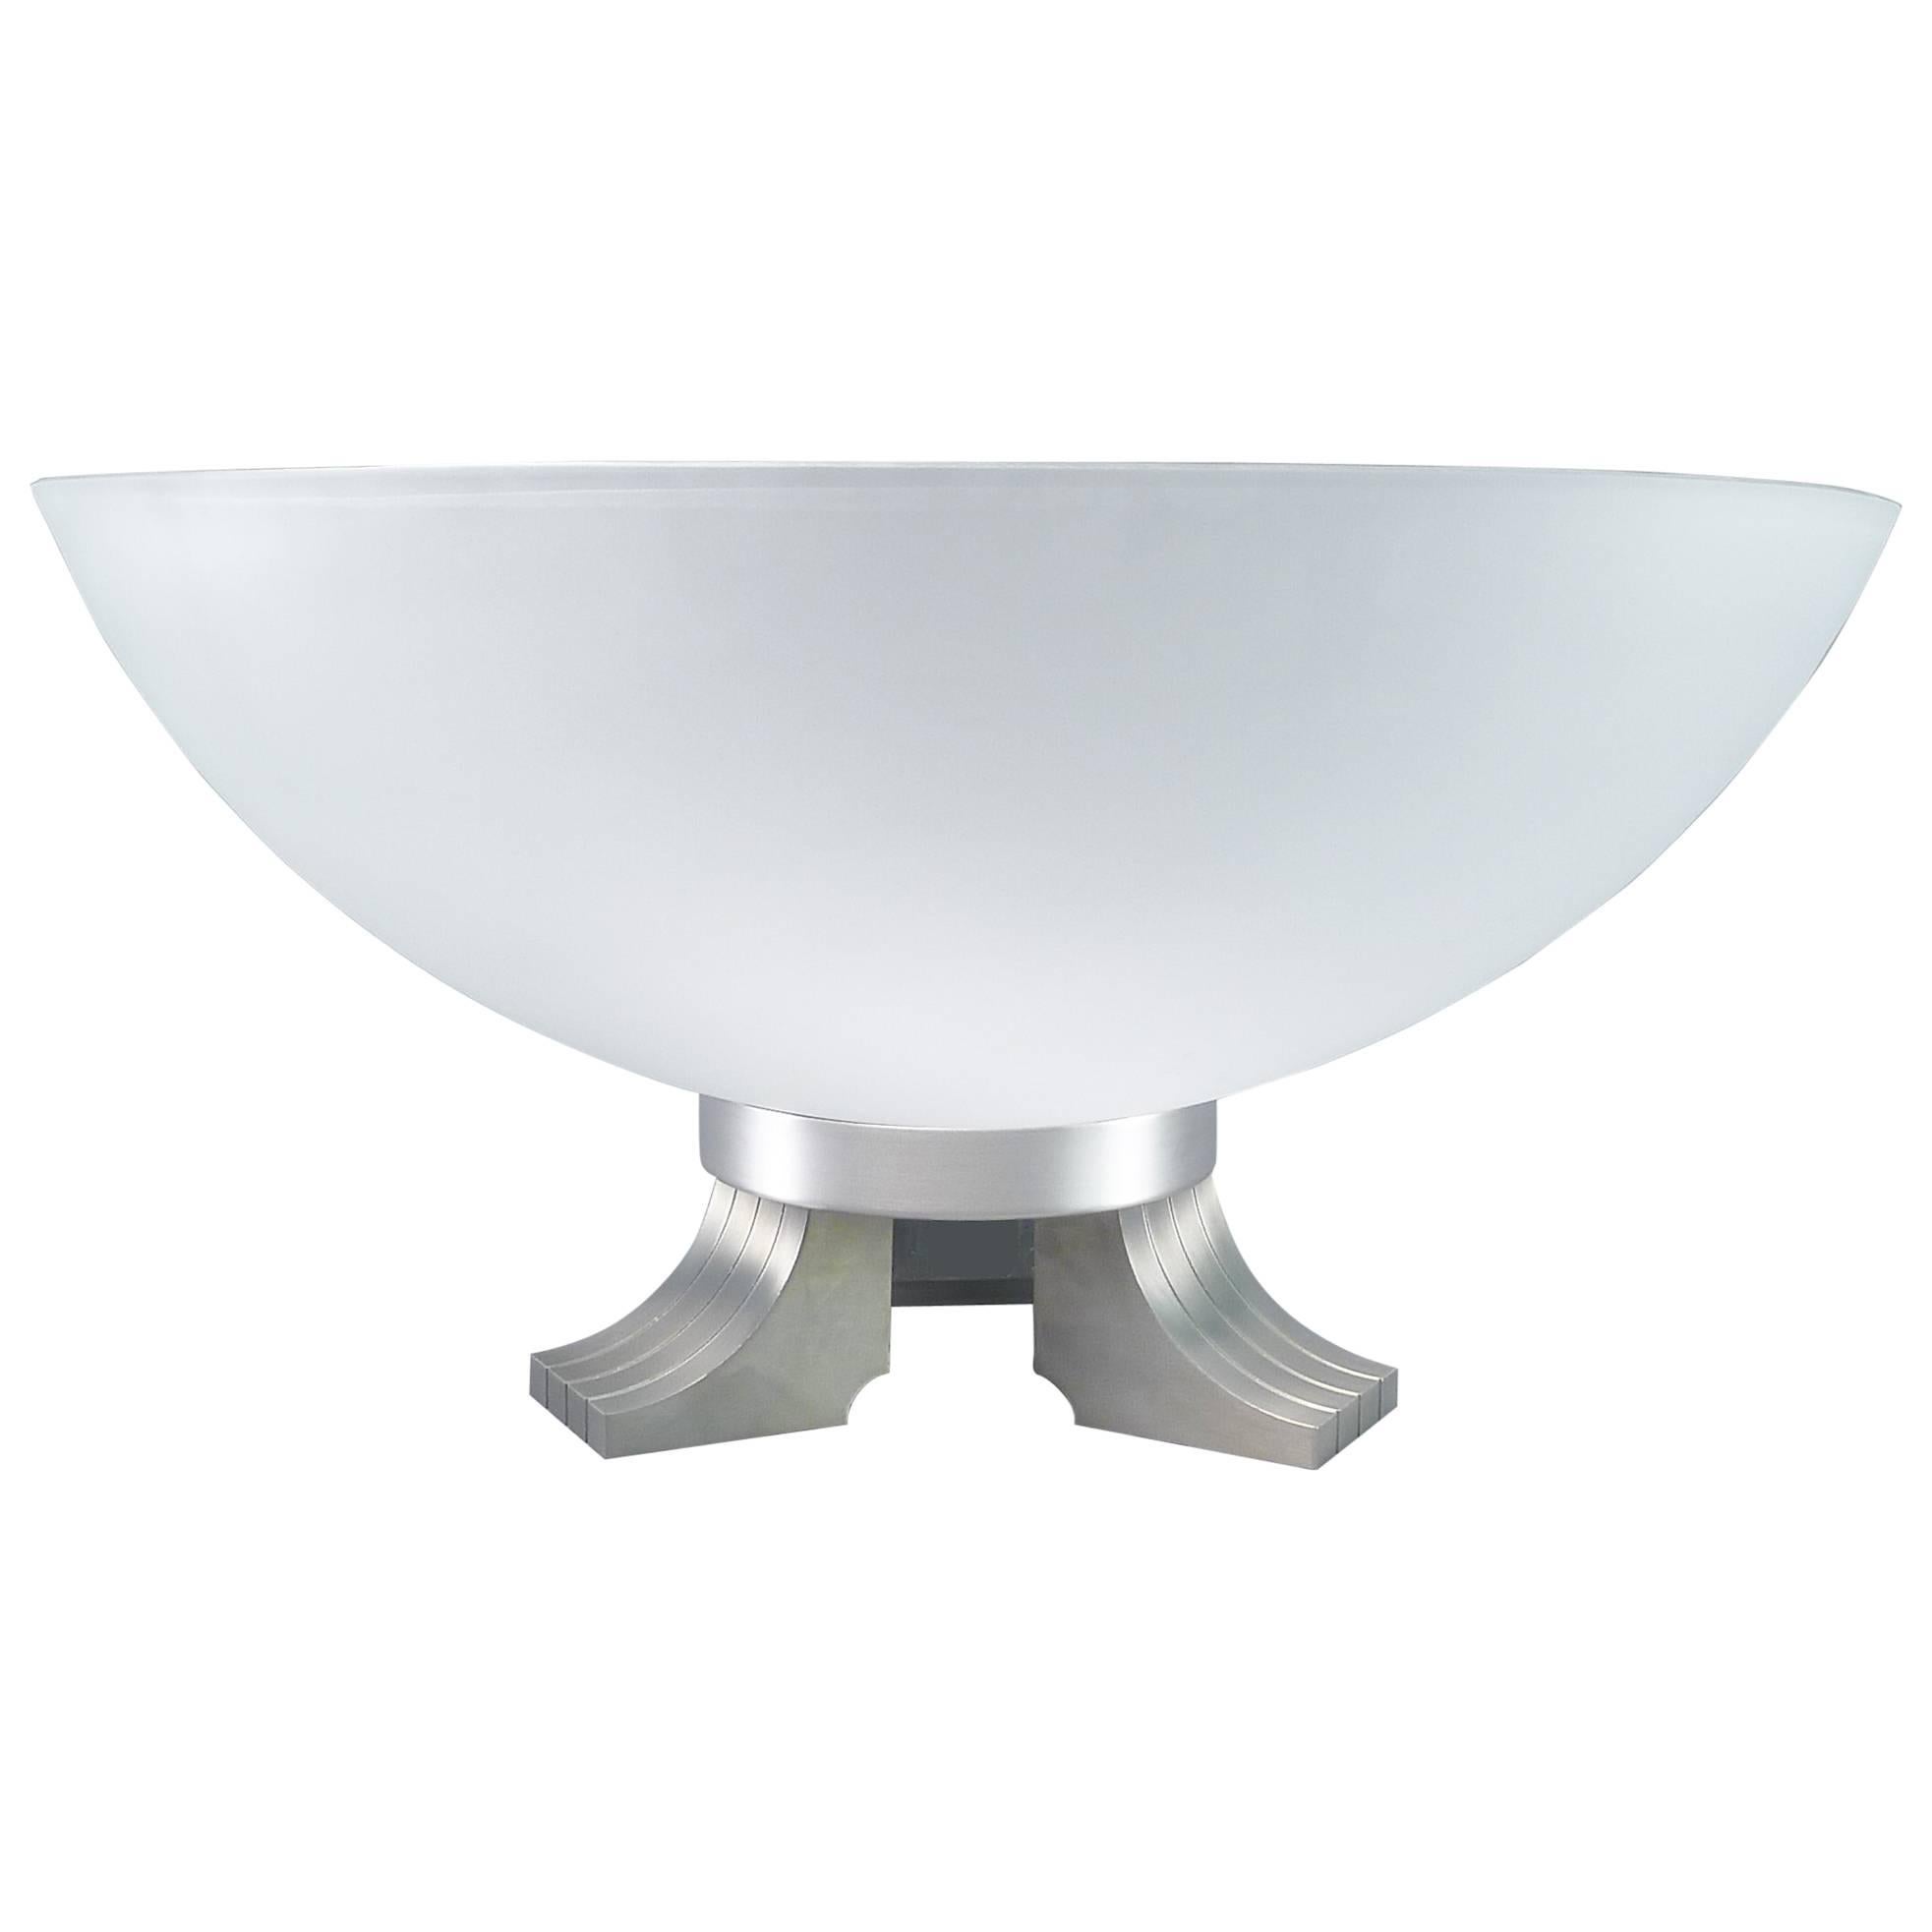 Centerpiece Glass Bowl with Cast Nickel Base